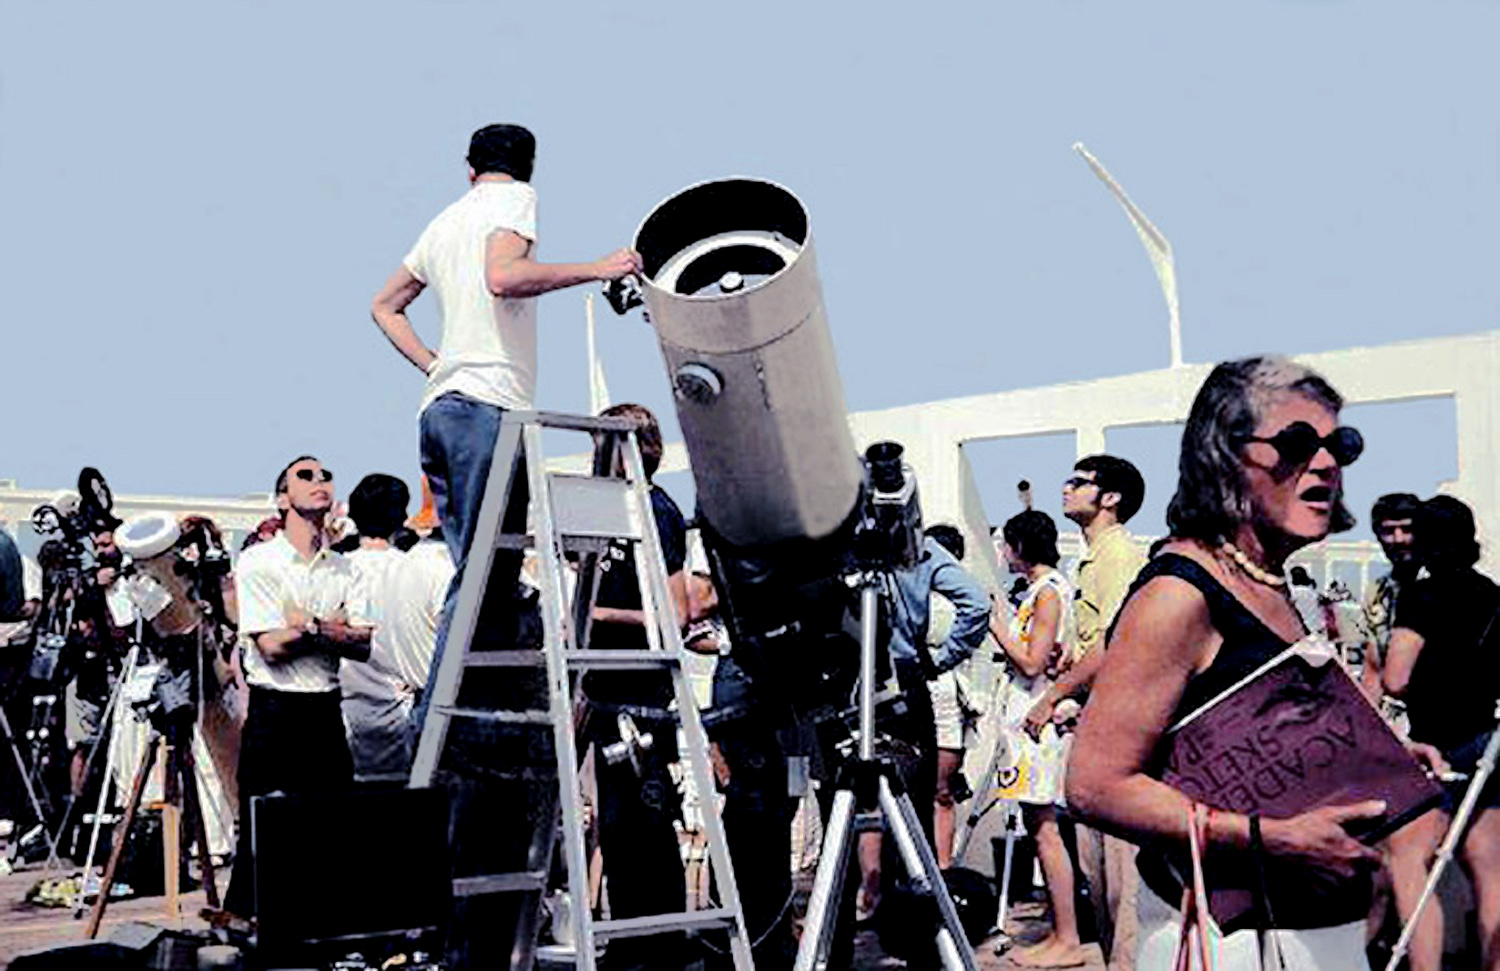 Eclipse 1973 - D63-Eclipse - Dave & Scope on Canberra